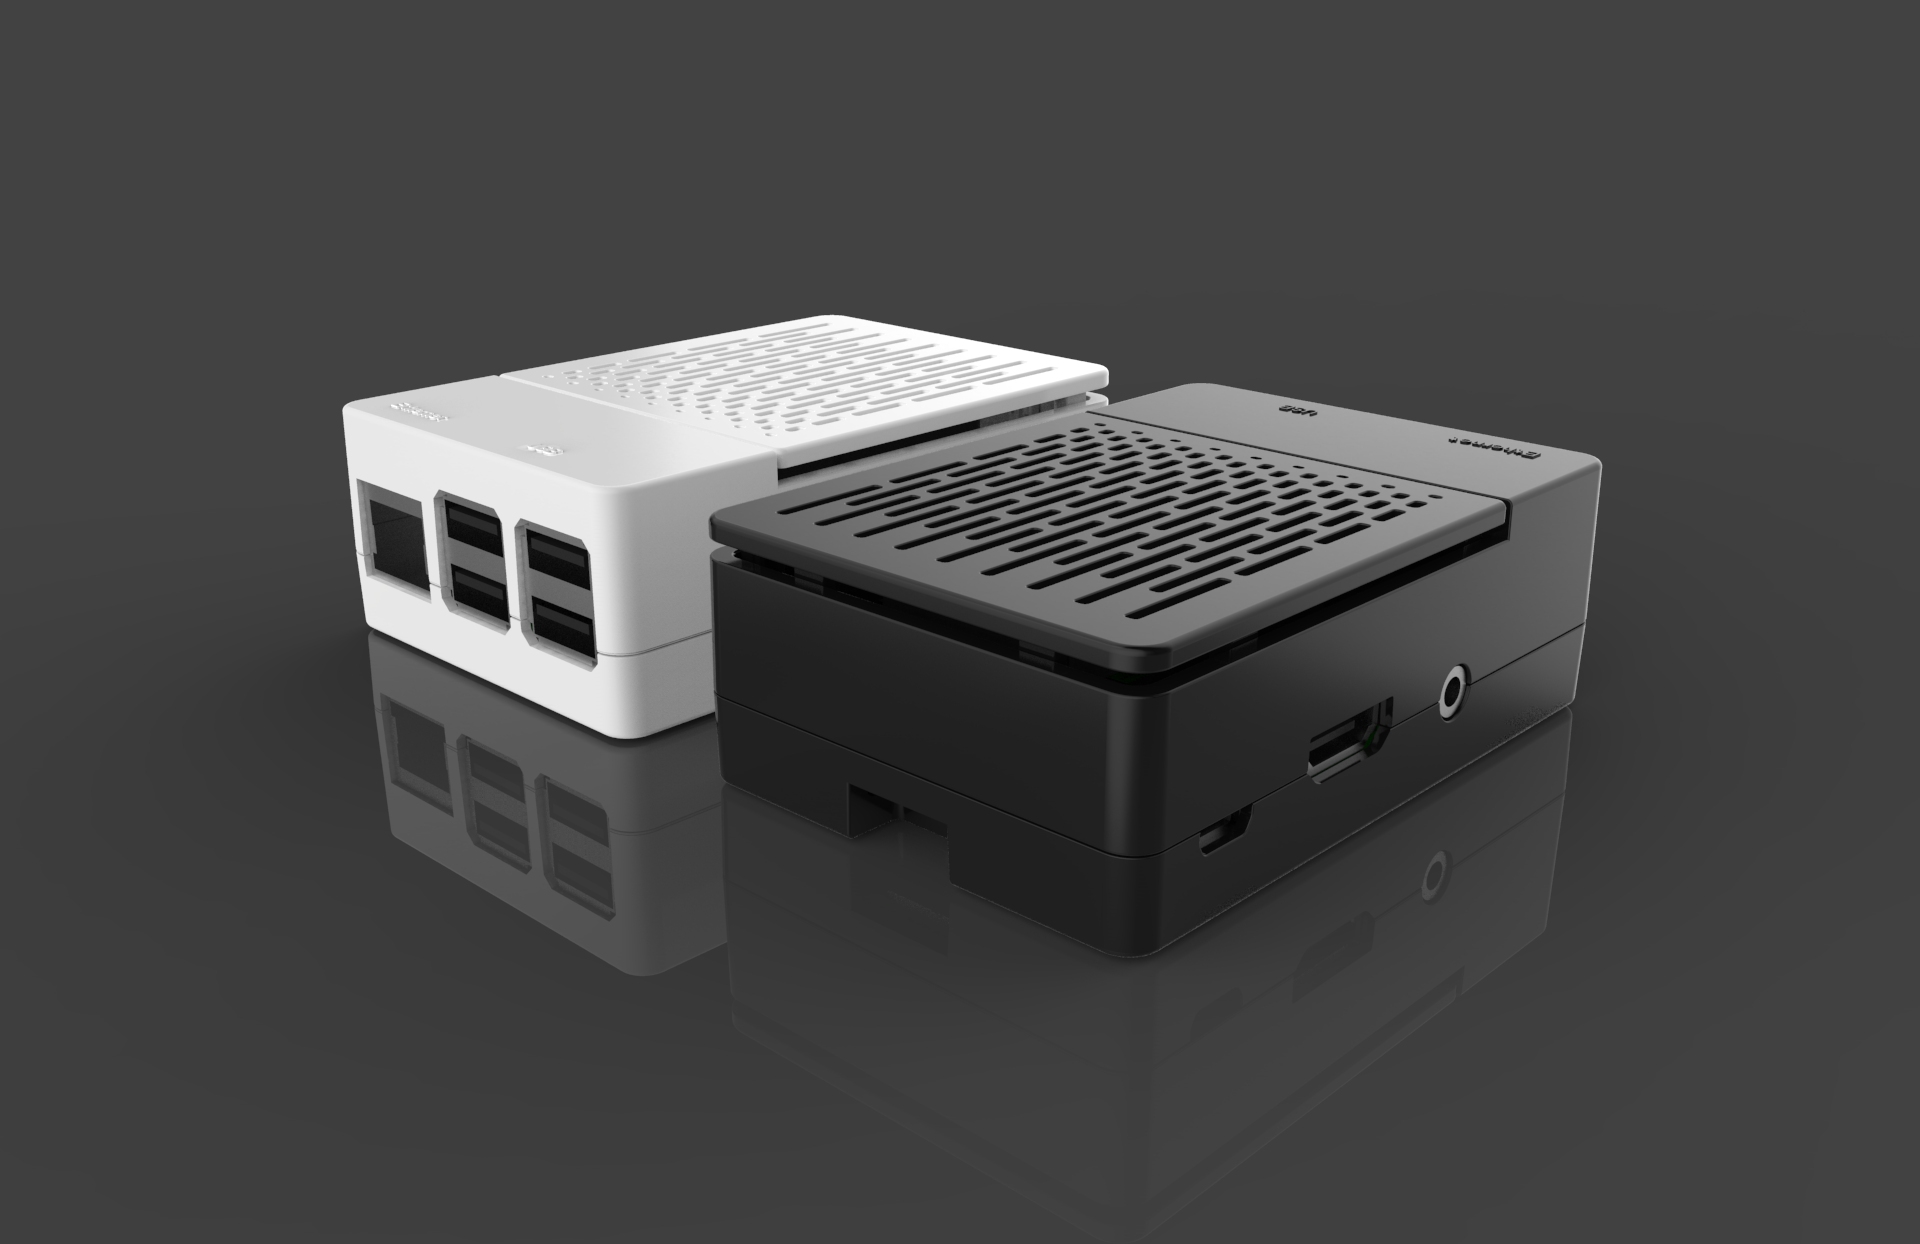 Black/White Assembled Exclouse Case + Quiet Cooling Fan + Heatsink Support GPIO or Camera For Raspberry Pi 3/2/B+ 12